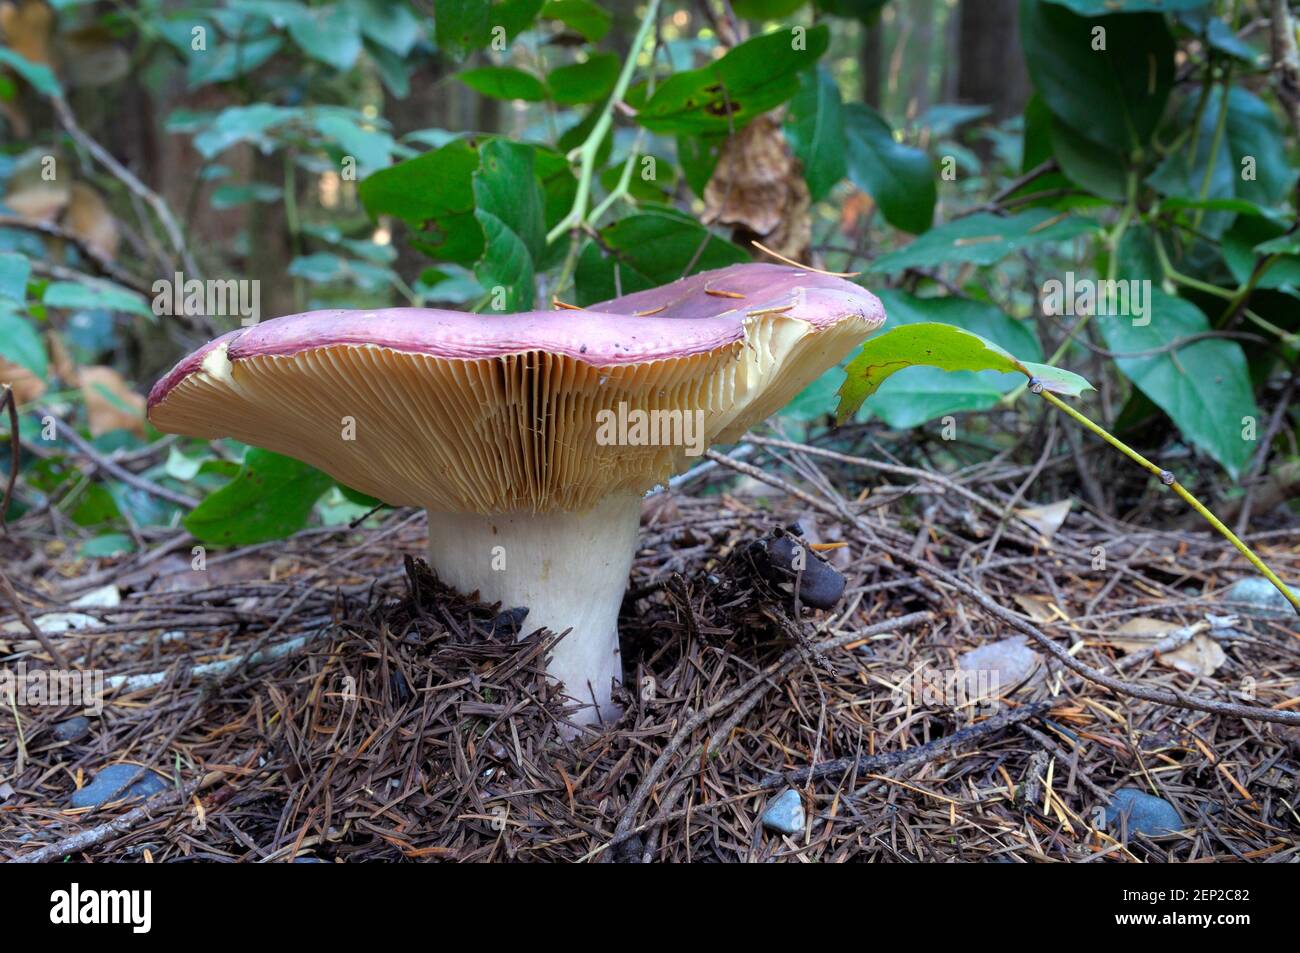 Rosy Russula (Russula sanguinea) showing the gills Stock Photo